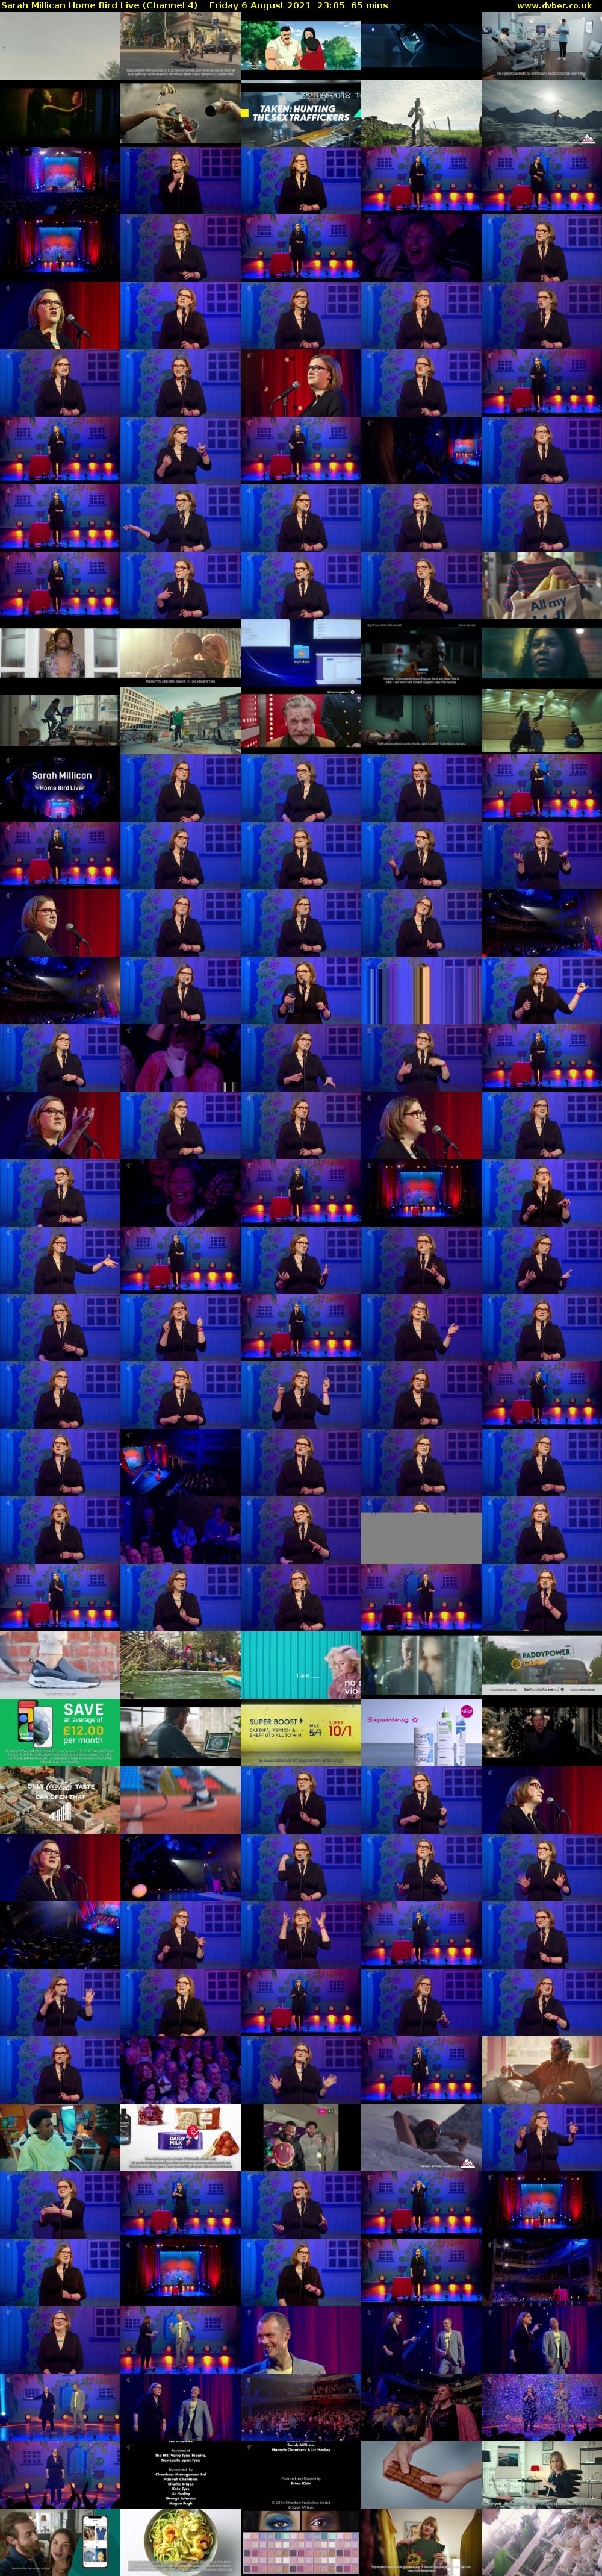 Sarah Millican Home Bird Live (Channel 4) Friday 6 August 2021 23:05 - 00:10